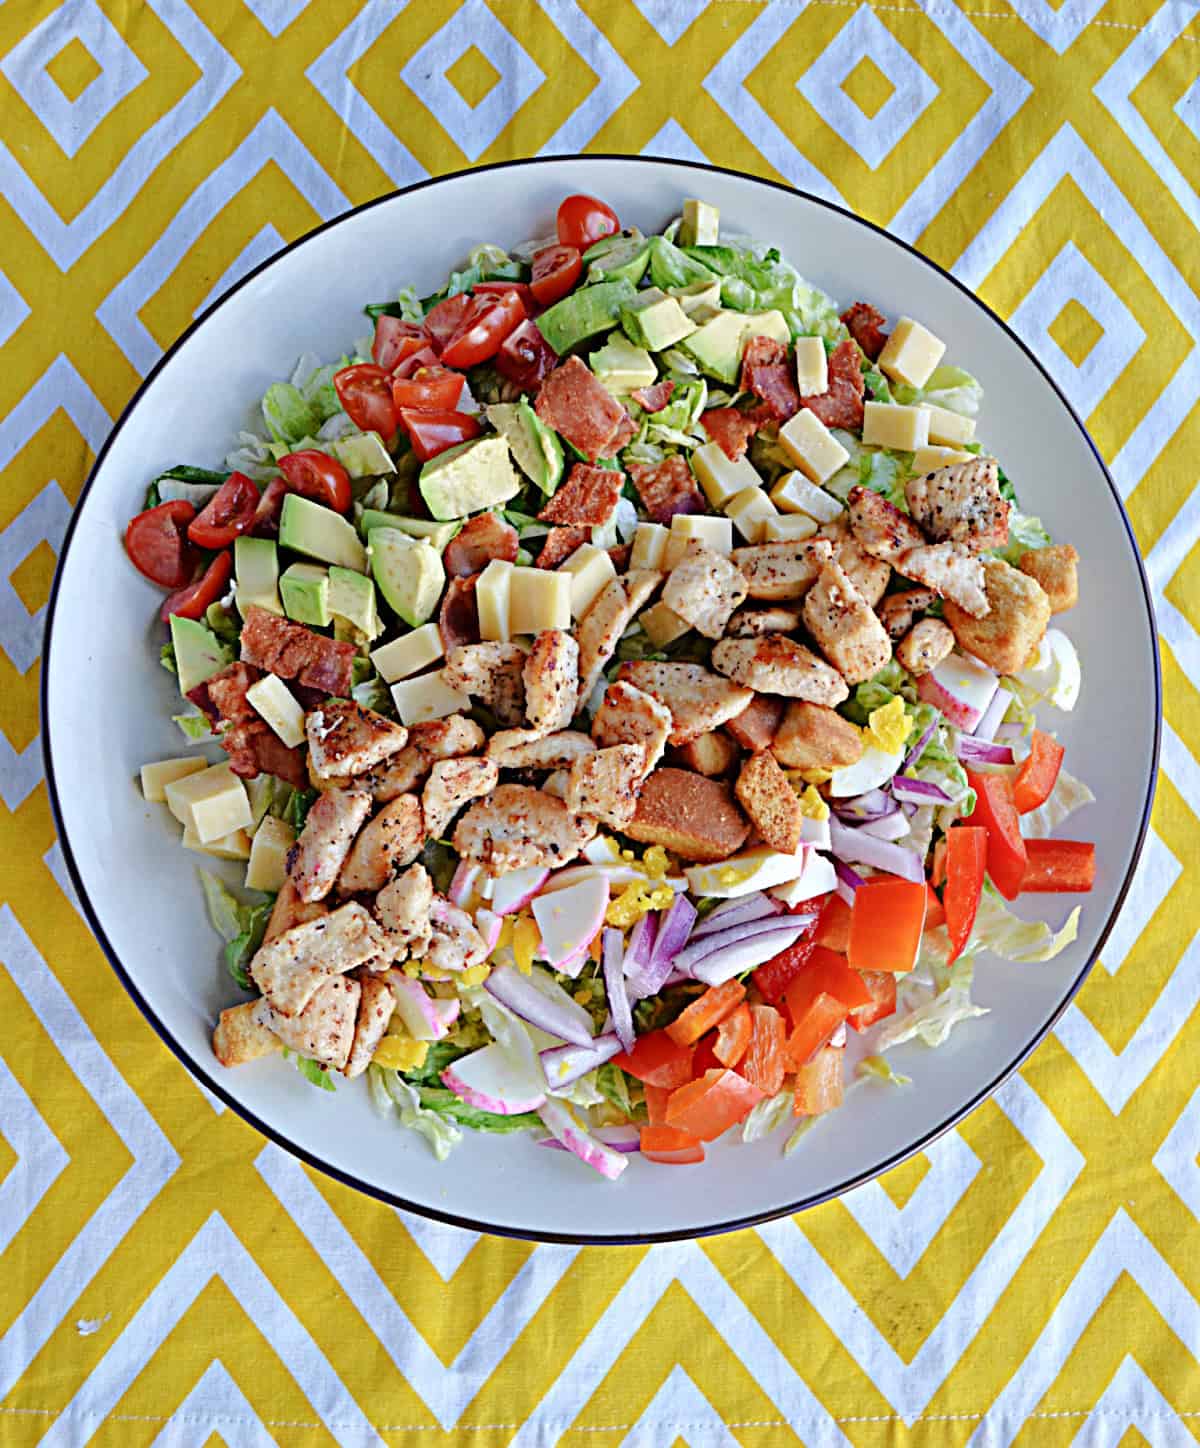 A plate of salad with chicken , bacon, avocado, cheese, peppers, tomatoes, and croutons on it.